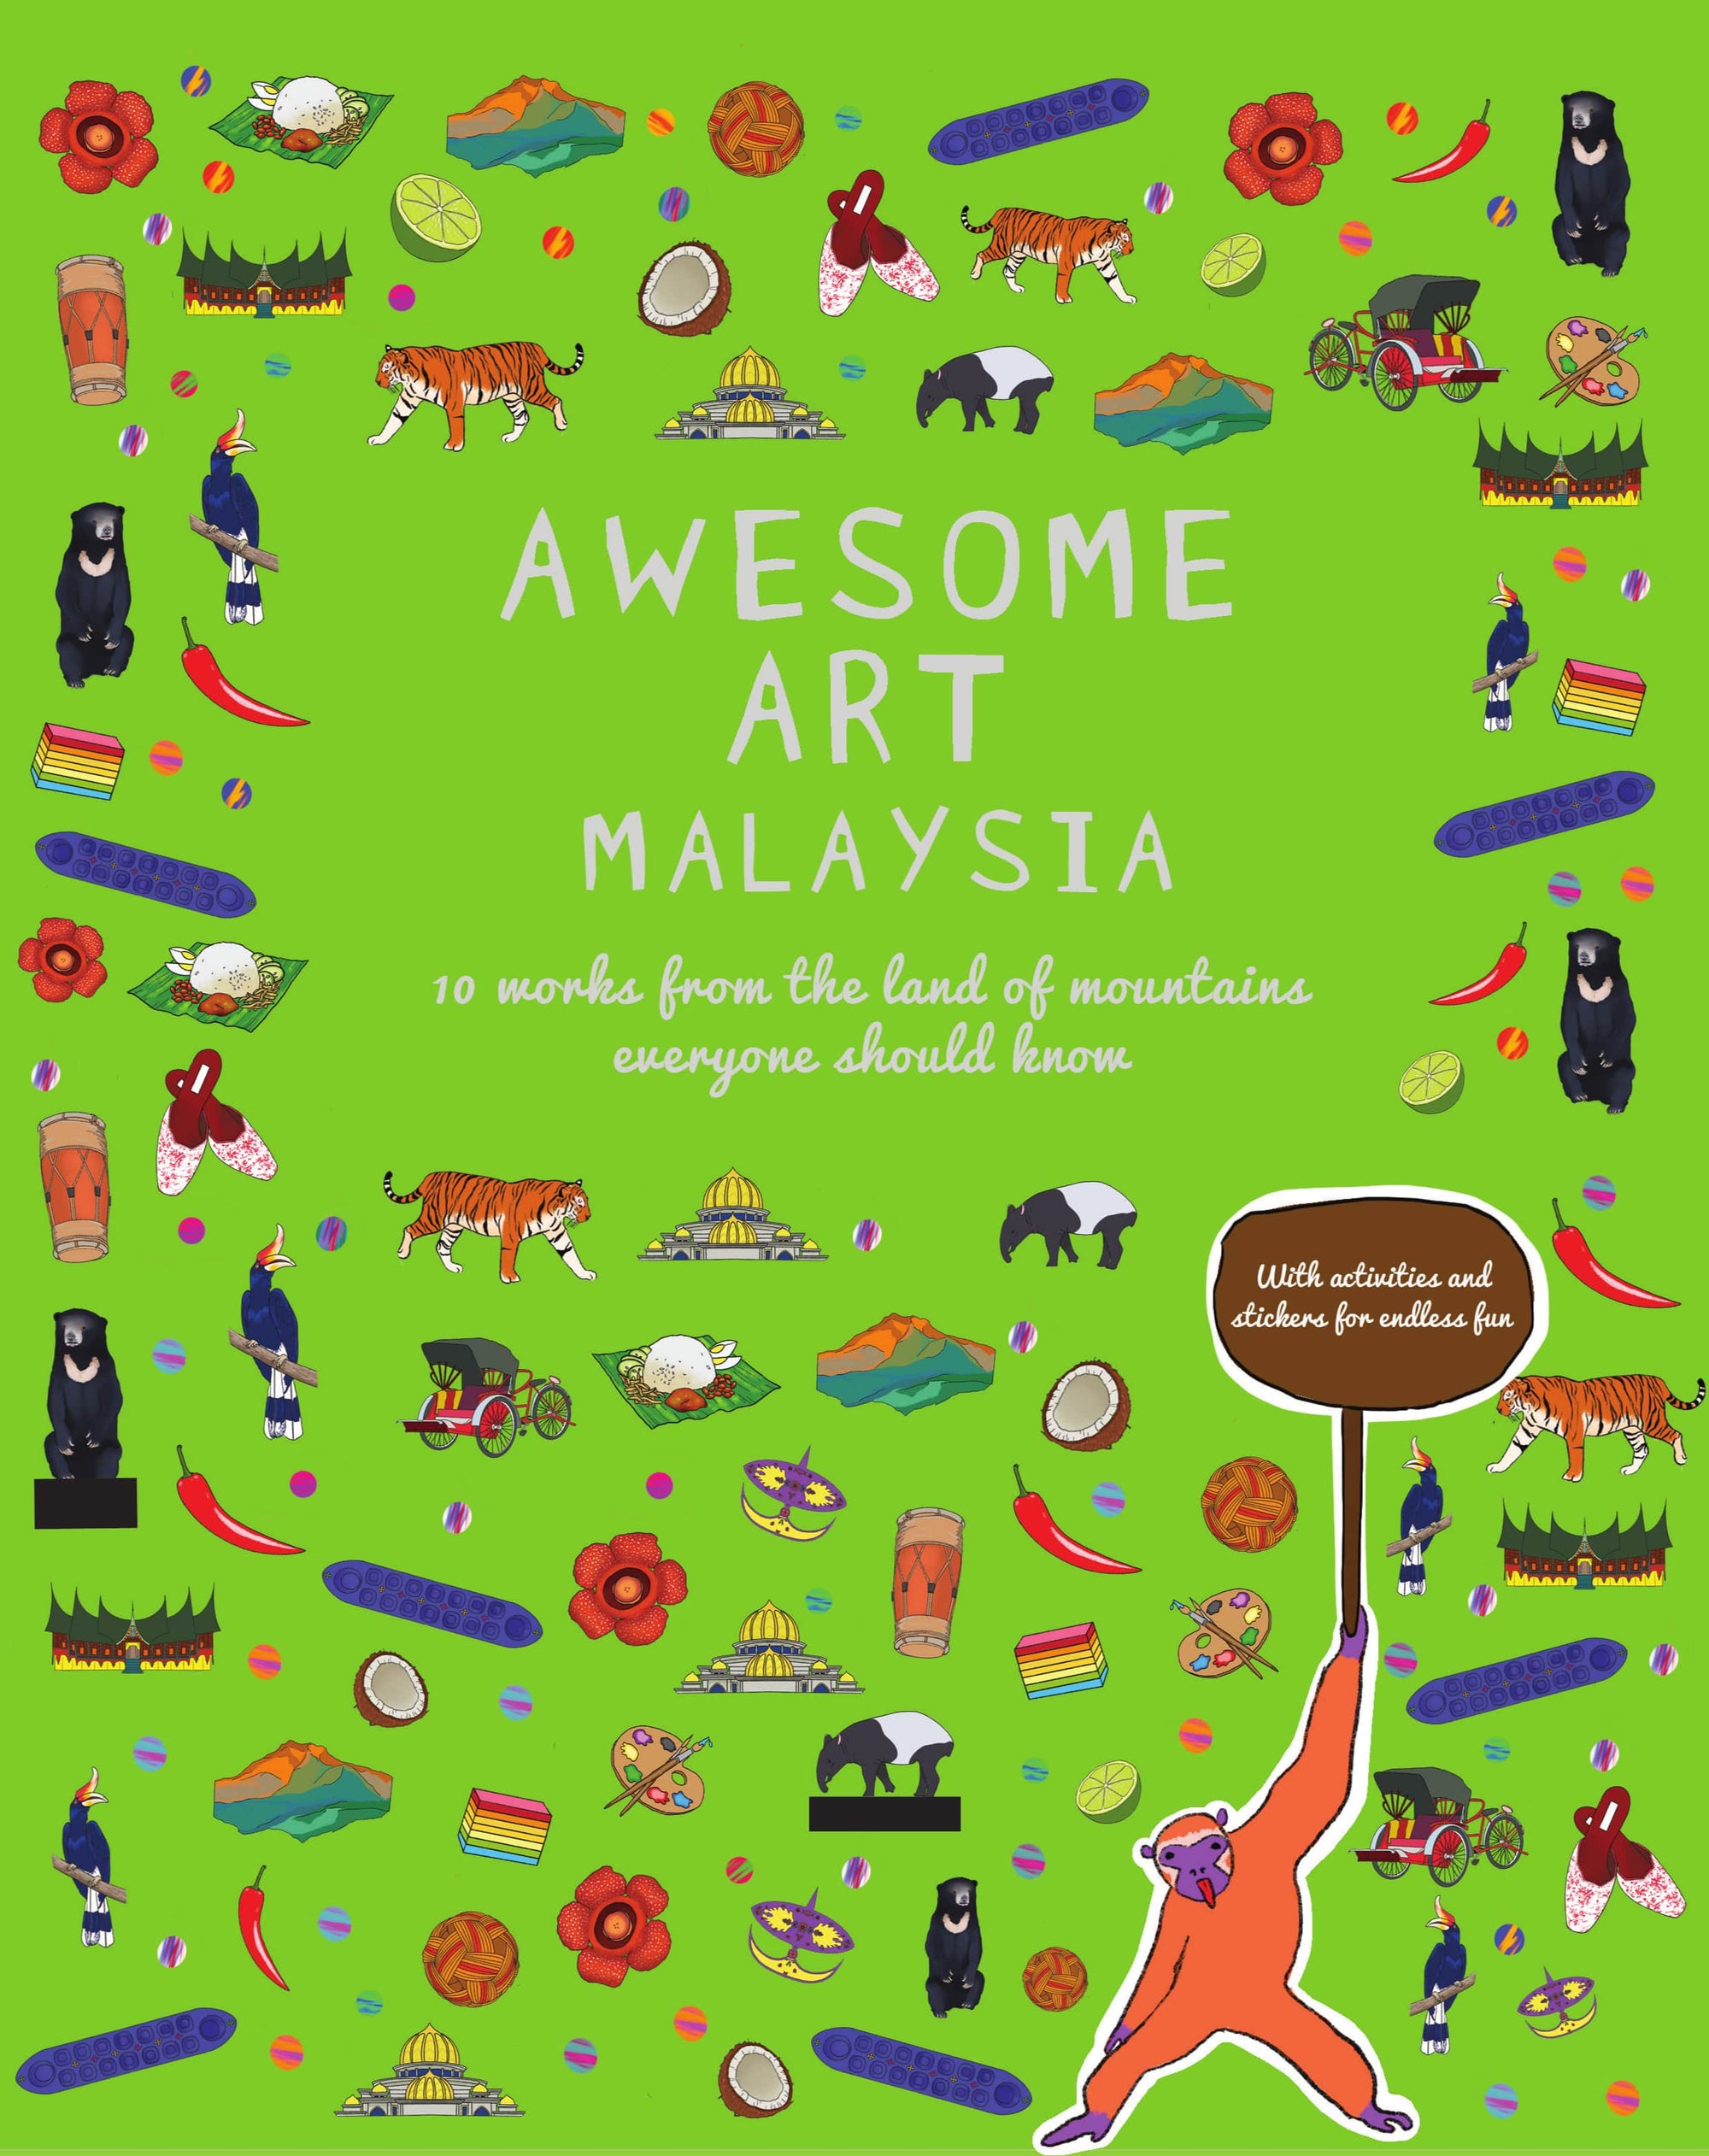 AWESOME ART MALAYSIA:10 WORKS FROM THE LAND OF MOUNTAINS EVERYONE SHOULD KNOW